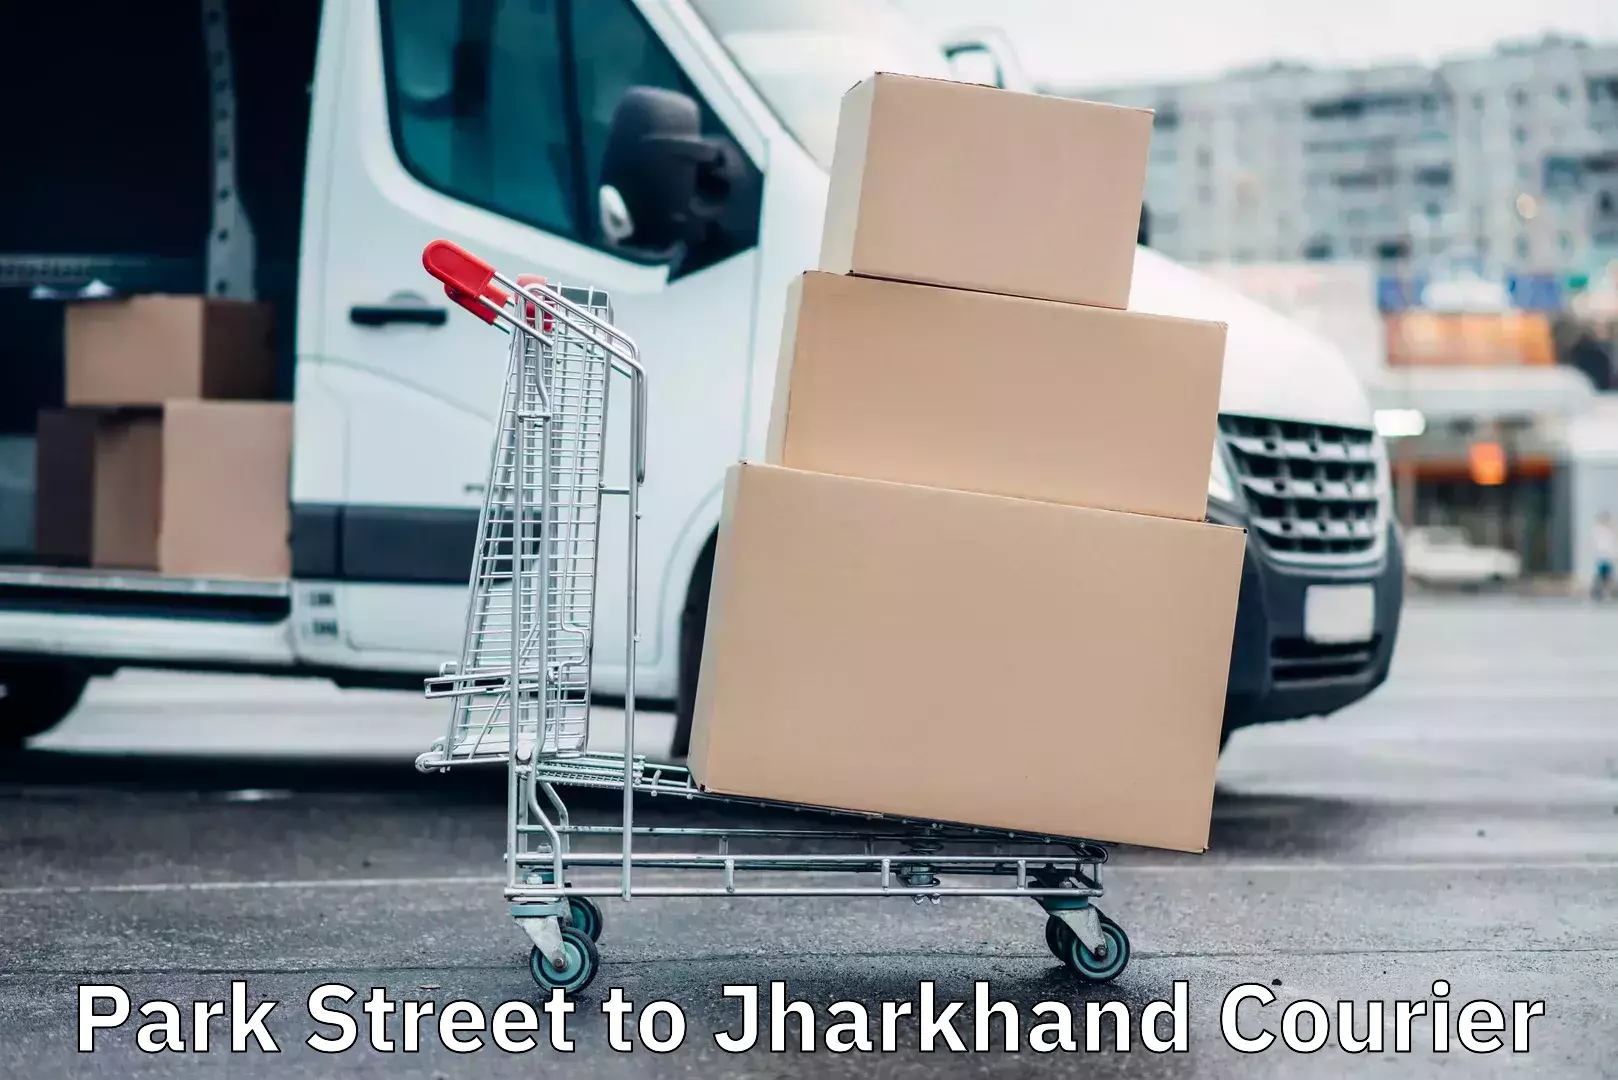 Express mail solutions Park Street to Jharkhand